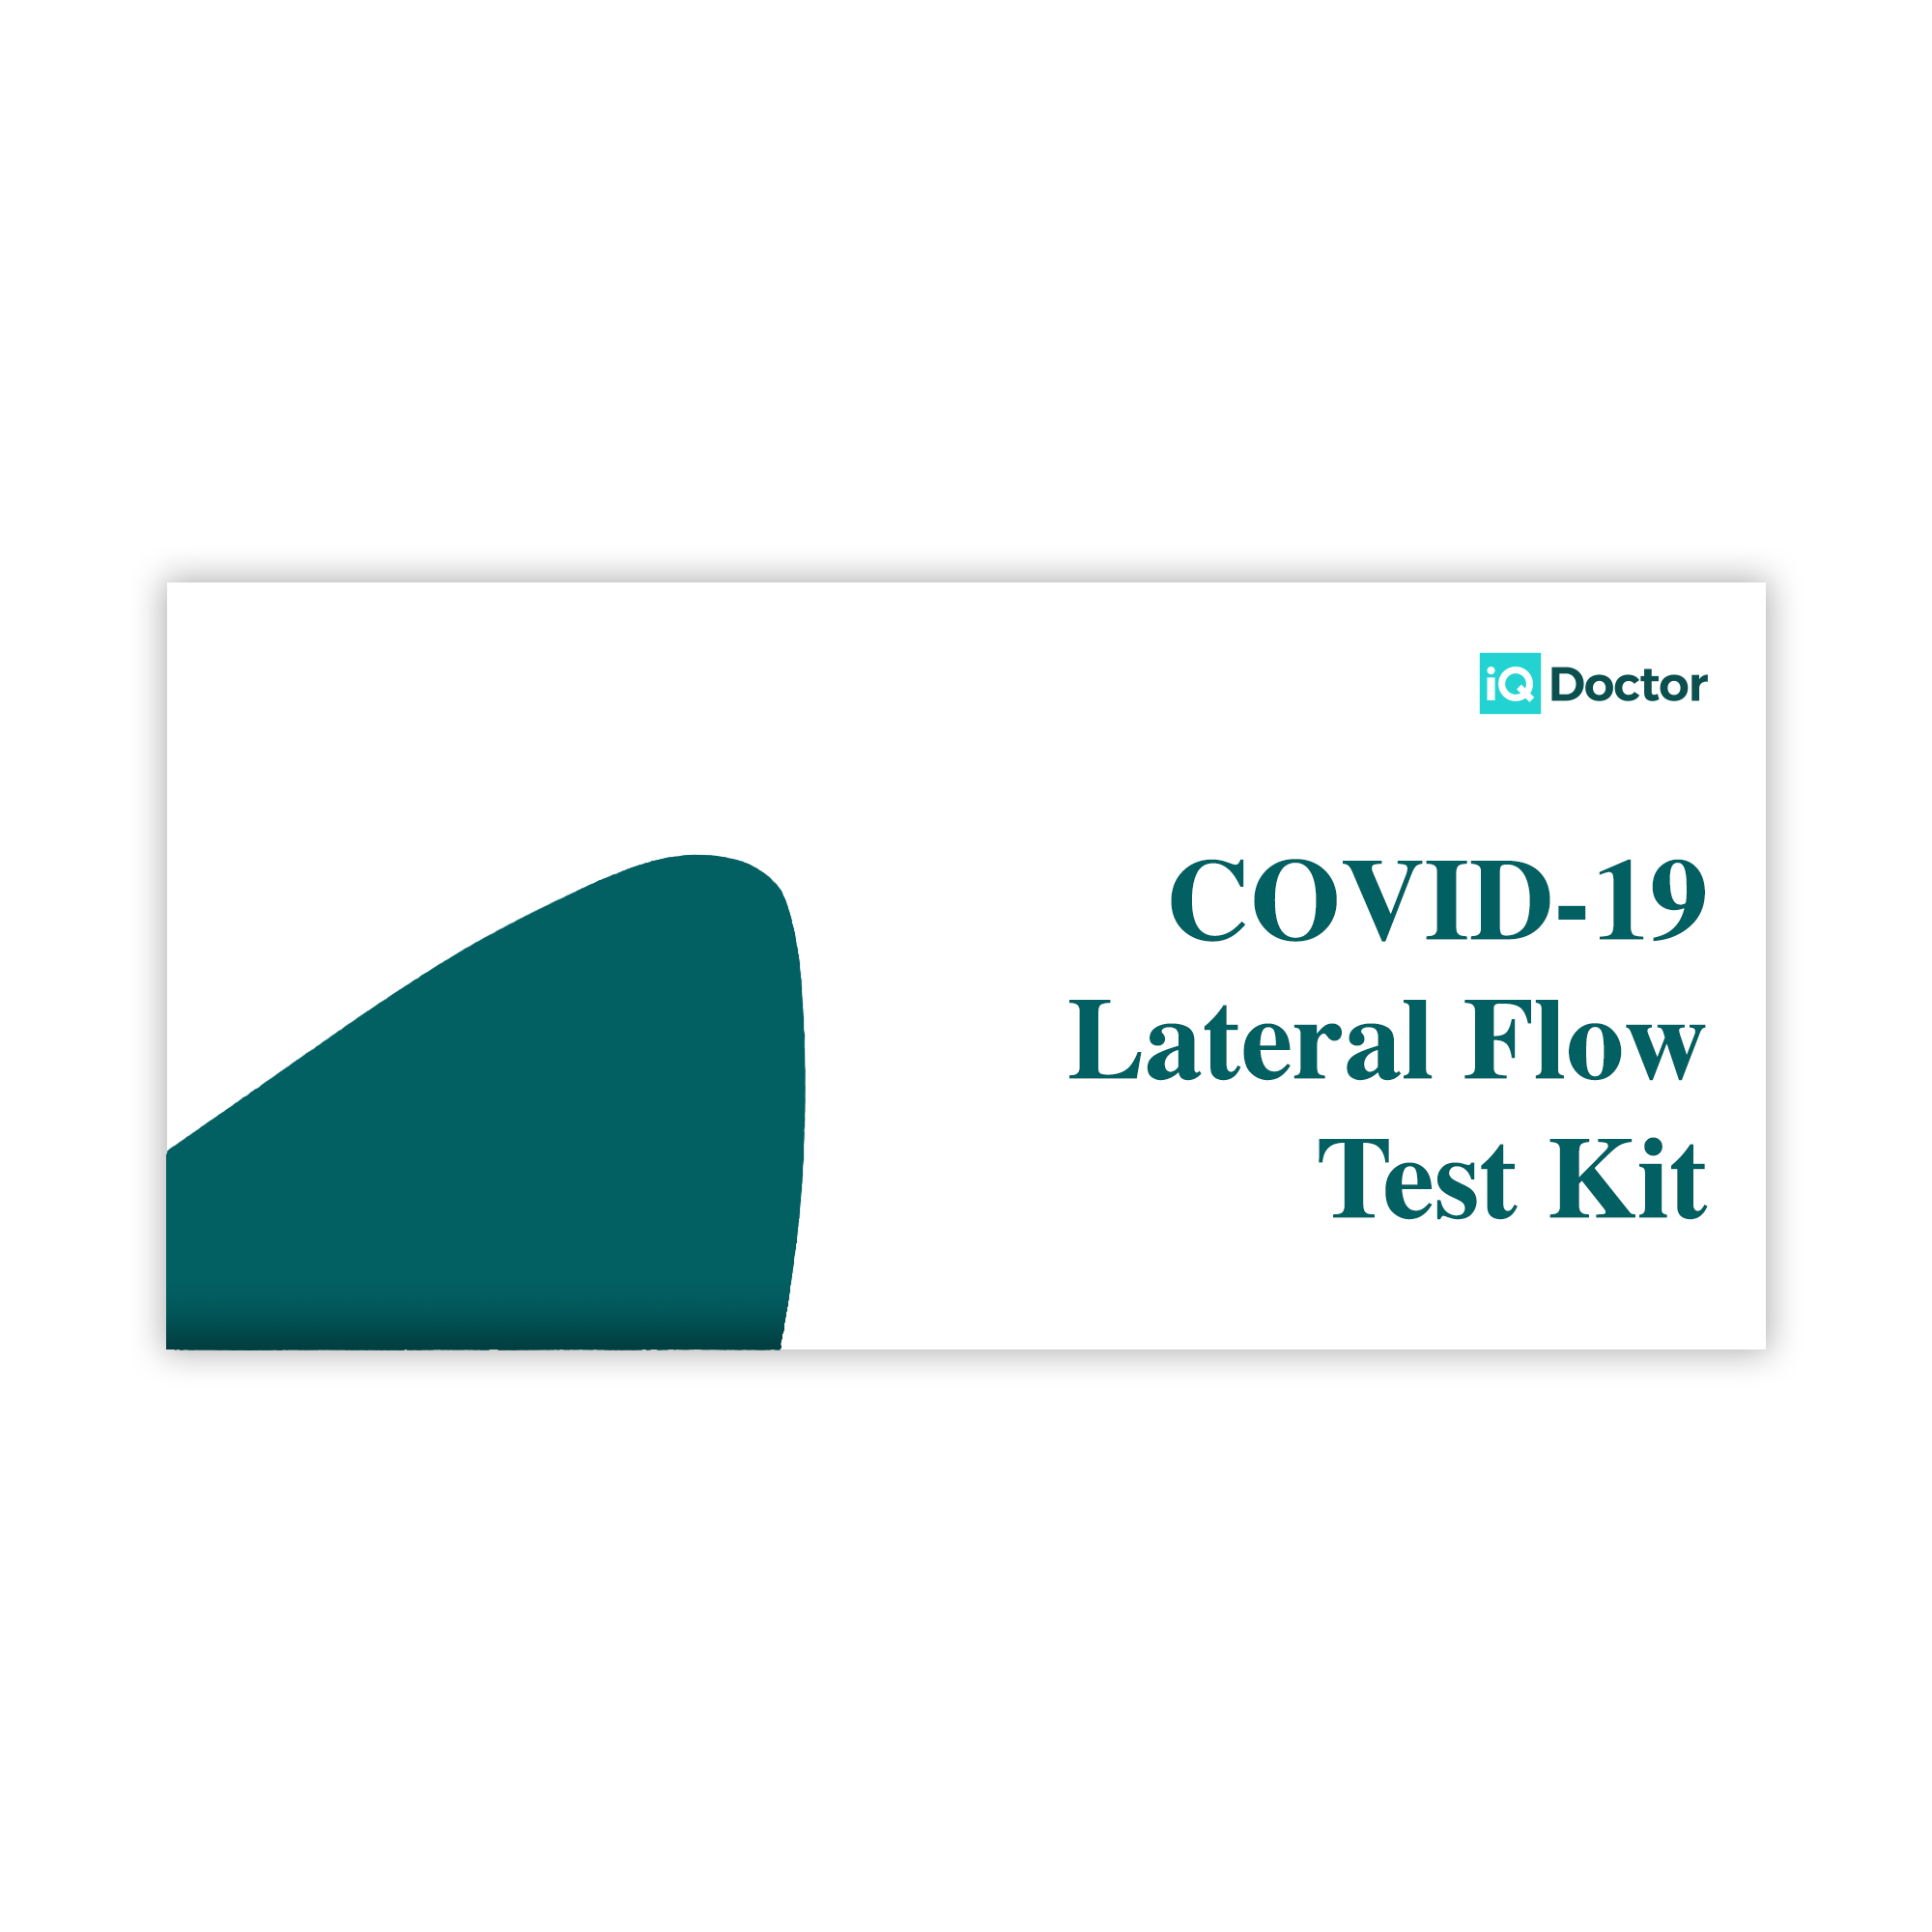 COVID-19 Recovery Certificate